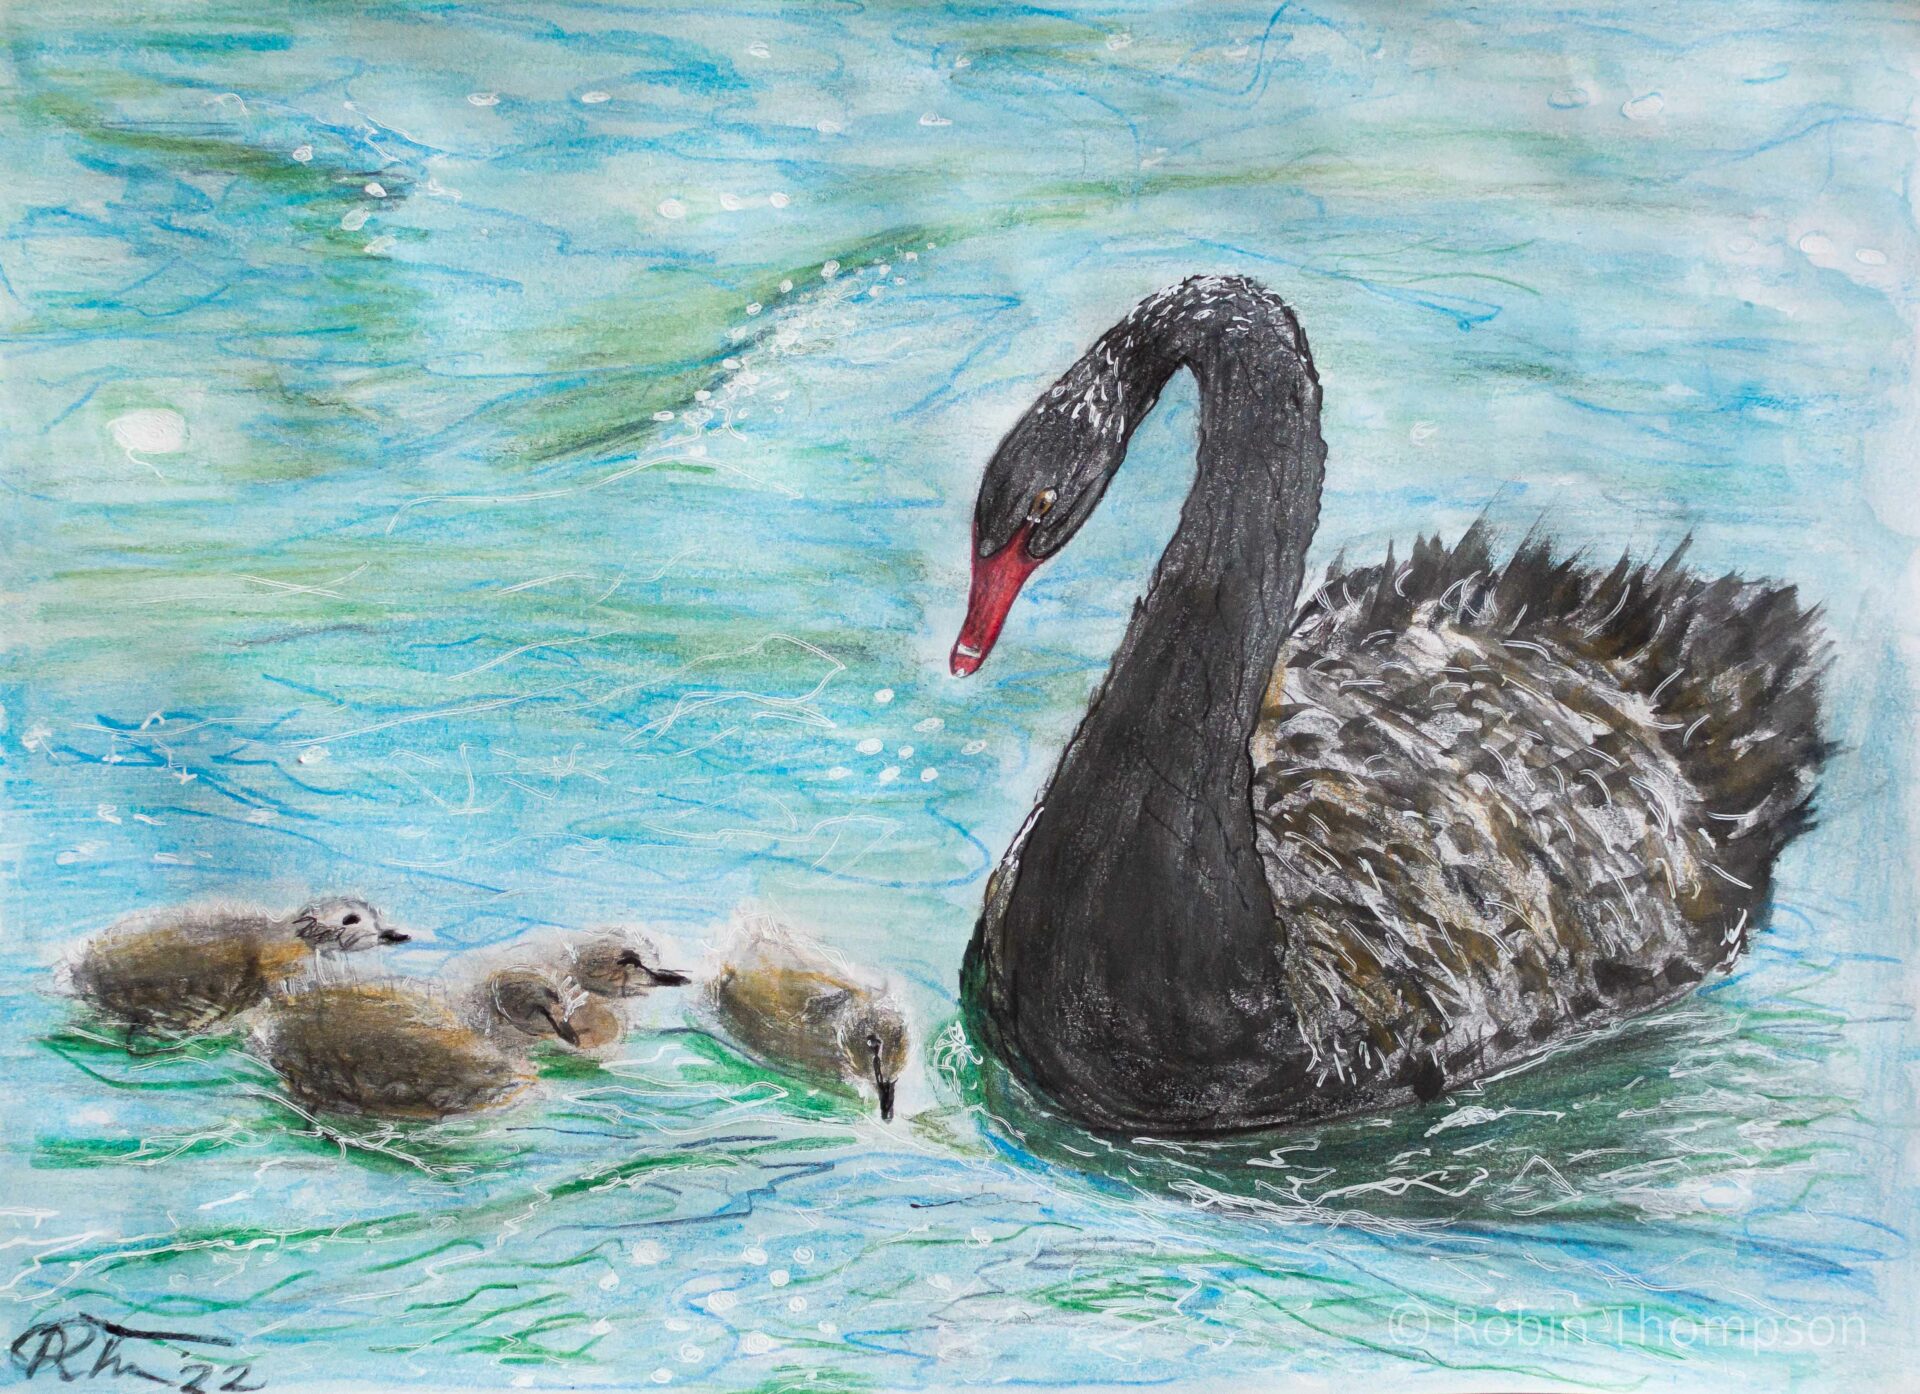 Watercolour and pencil drawing of a black swan bird swimming with their young swanlings (cygnets). The water appears cool and blue, with some hints of green. The cygnets appear soft and youthful.